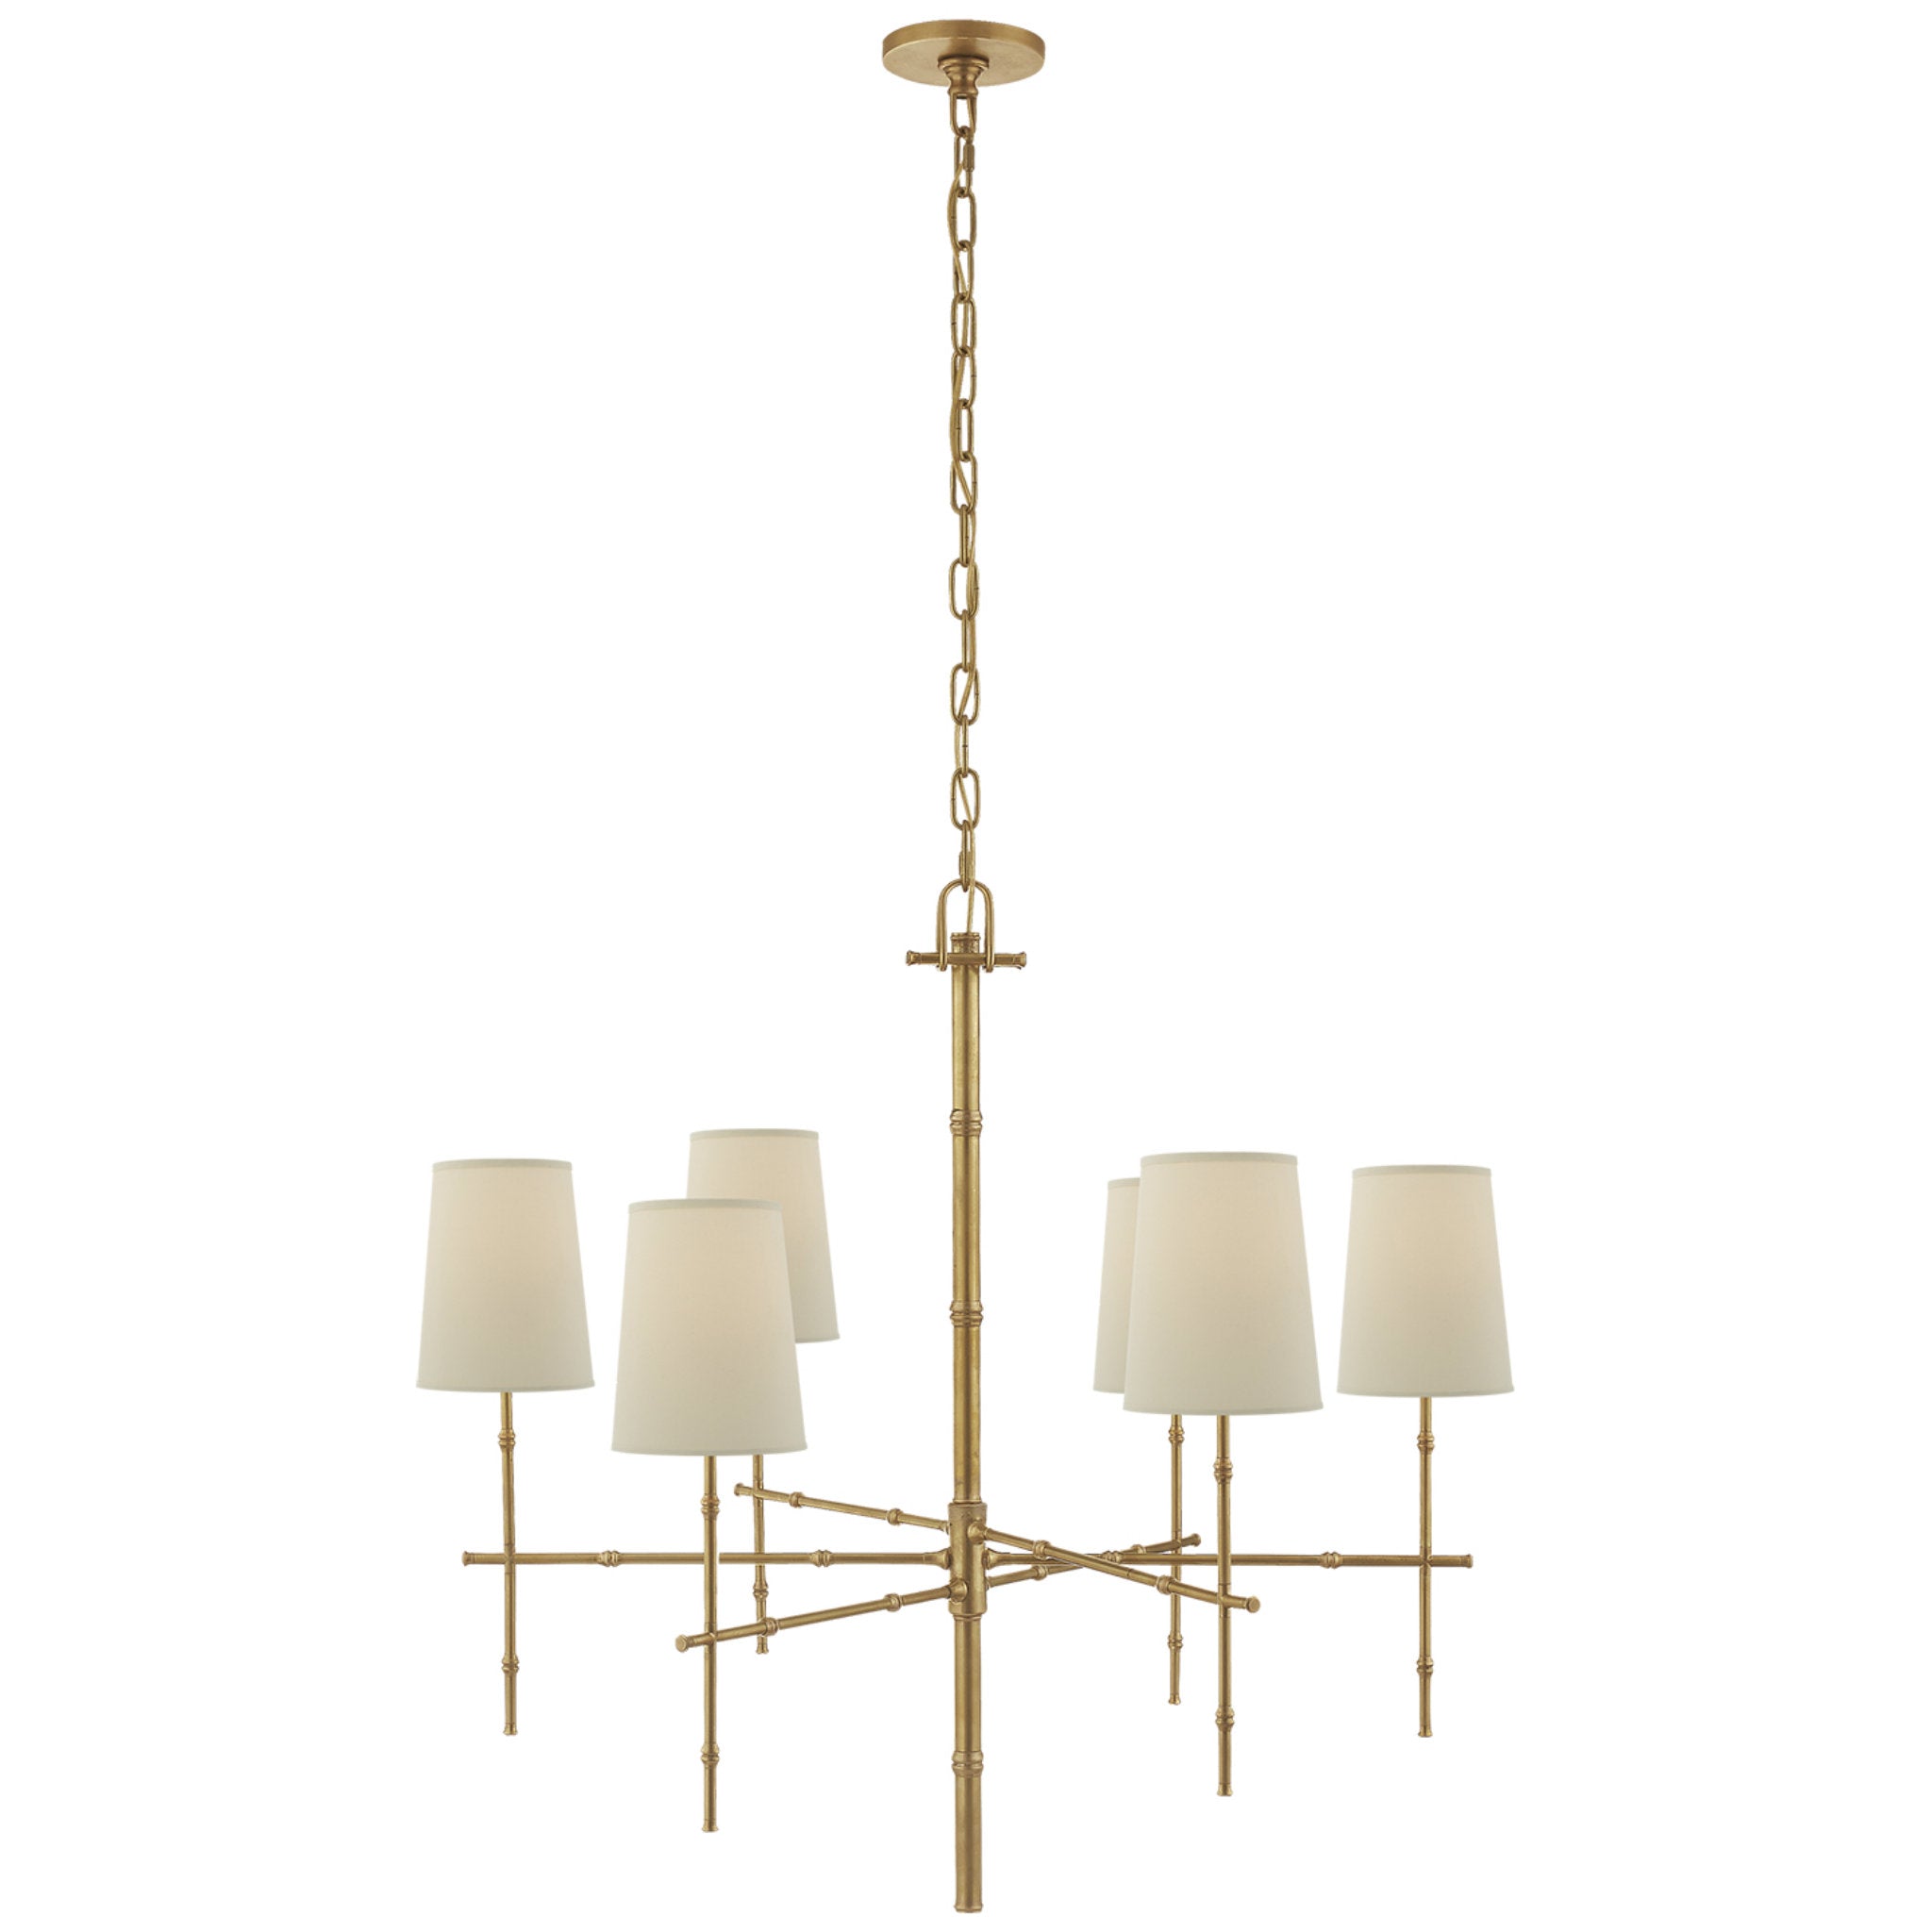 Visual Comfort Grenol Medium Modern Bamboo Chandelier in Hand-Rubbed Antique Brass with Natural Percale Shades